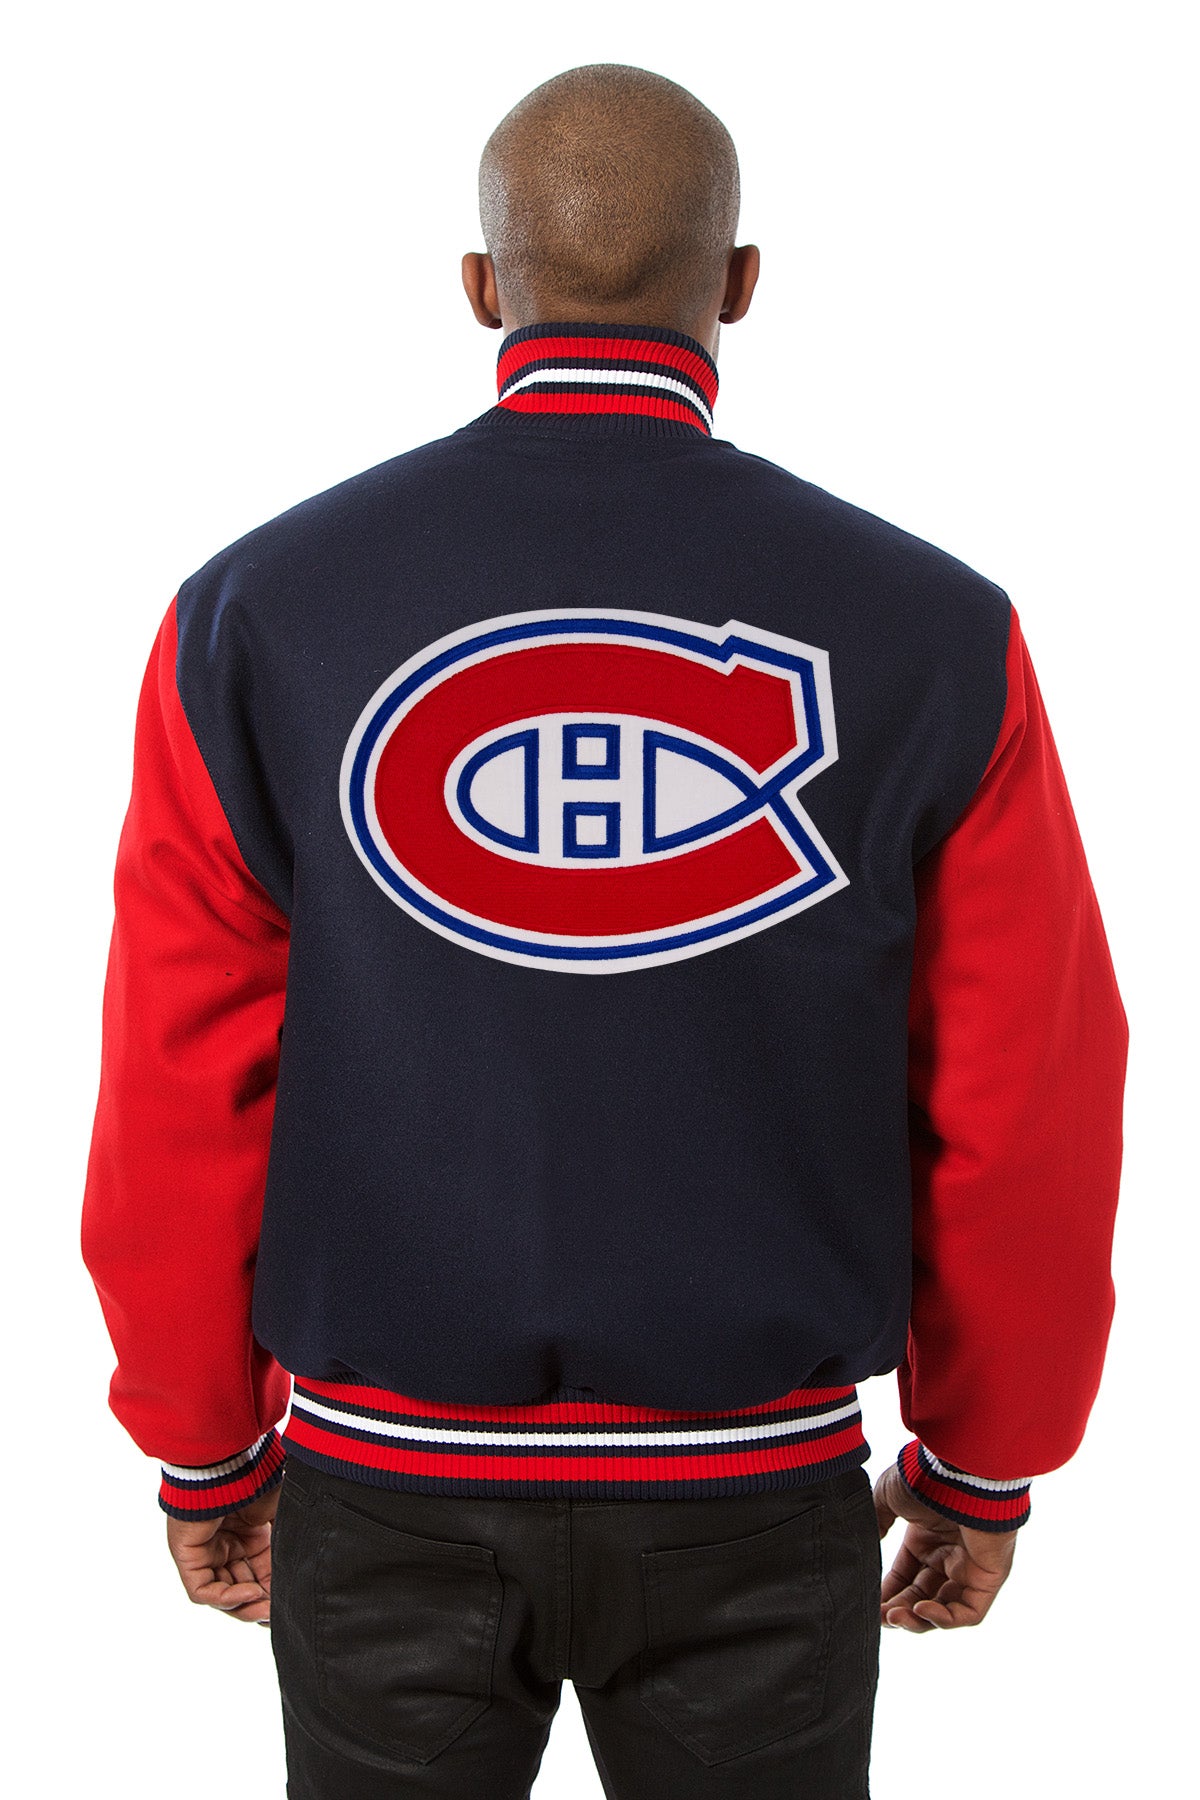 Montreal Canadiens Embroidered Wool Jacket - Navy/Red | J.H. Sports Jackets